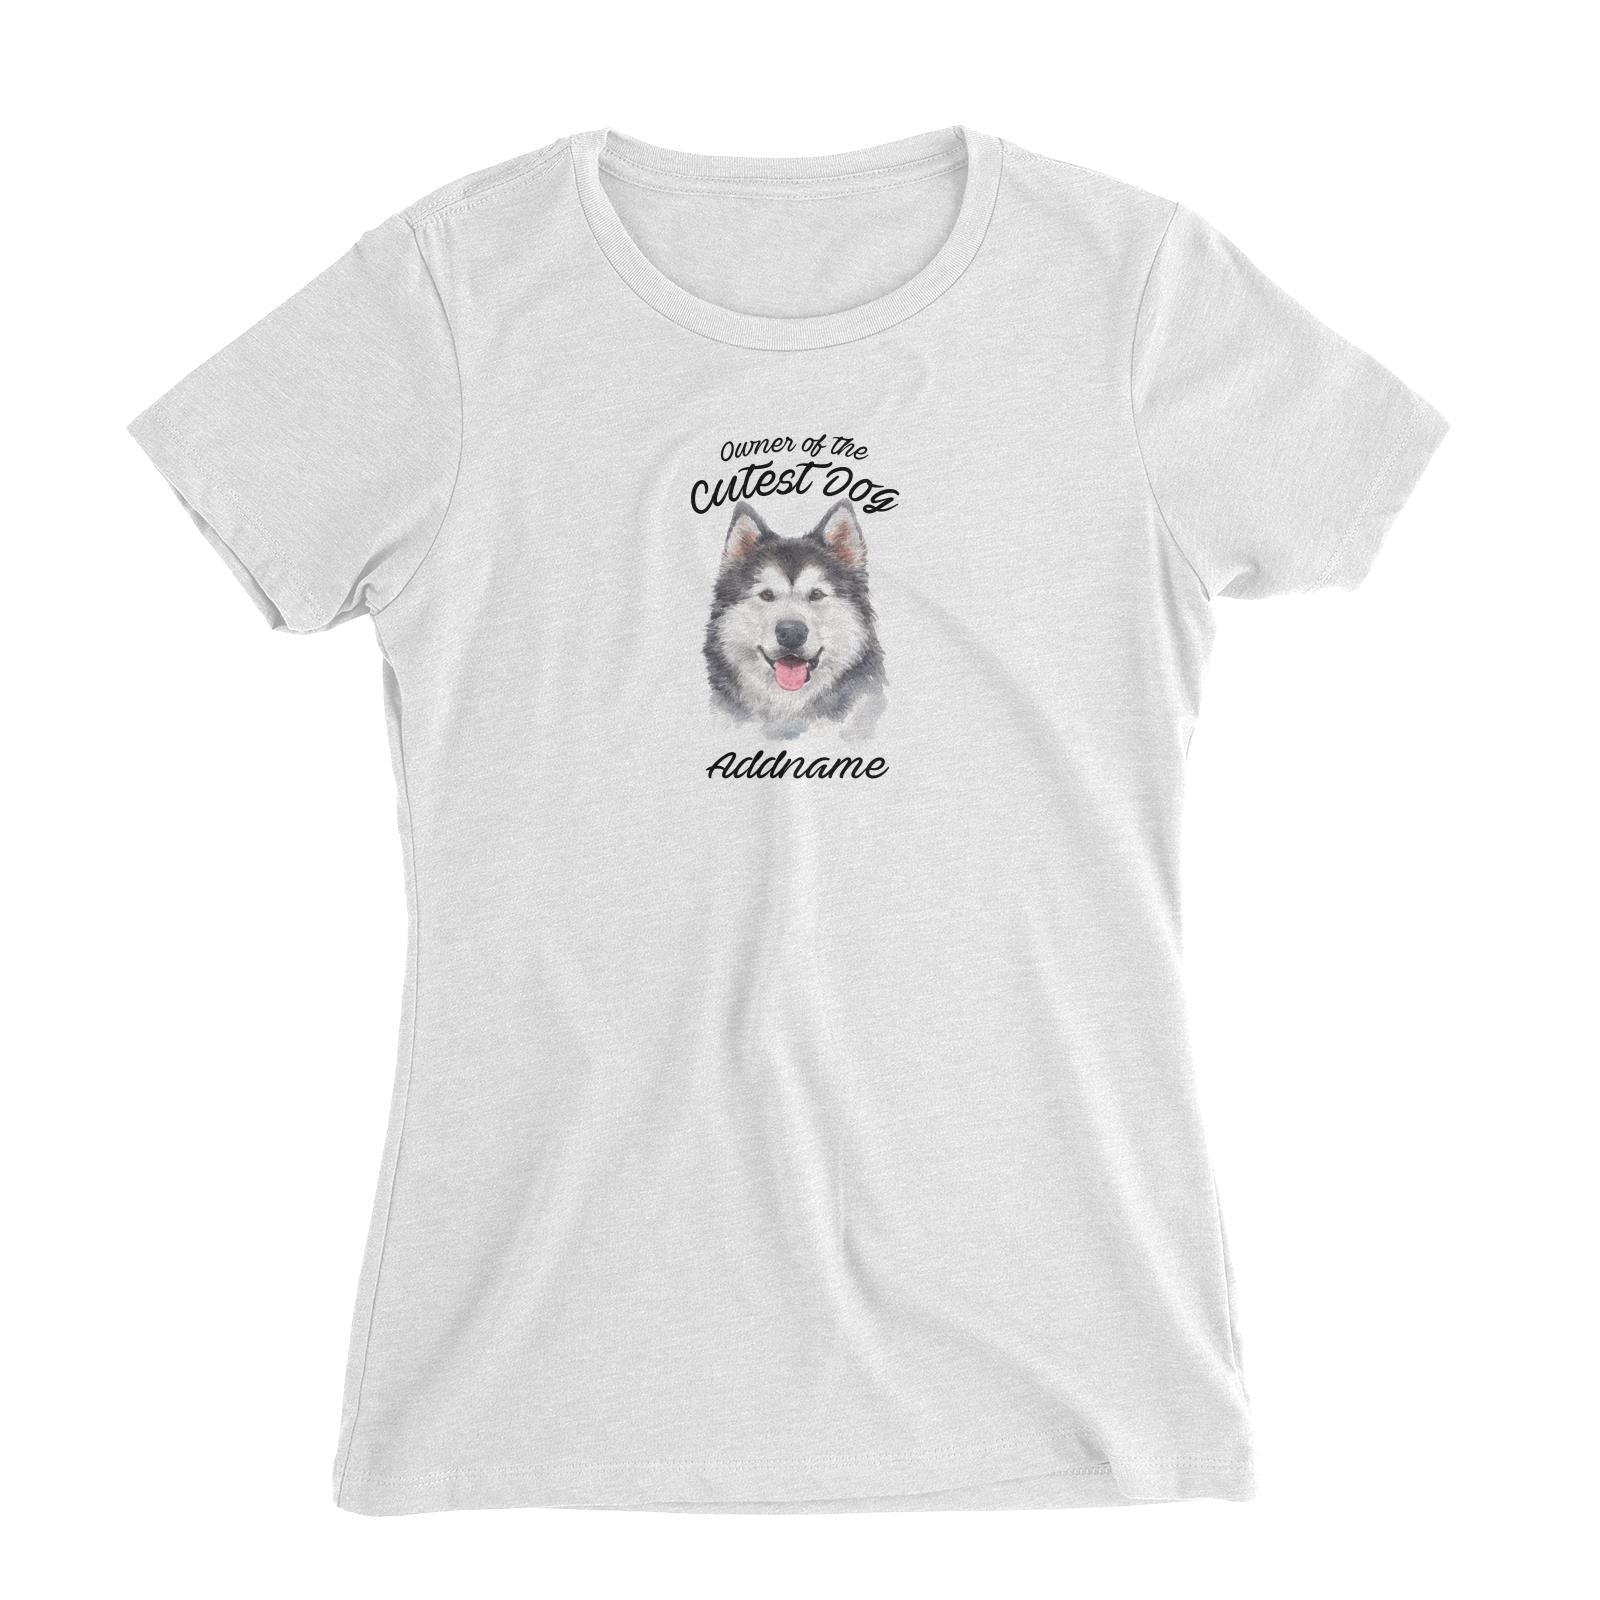 Watercolor Dog Owner Of The Cutest Dog Siberian Husky Smile Addname Women's Slim Fit T-Shirt